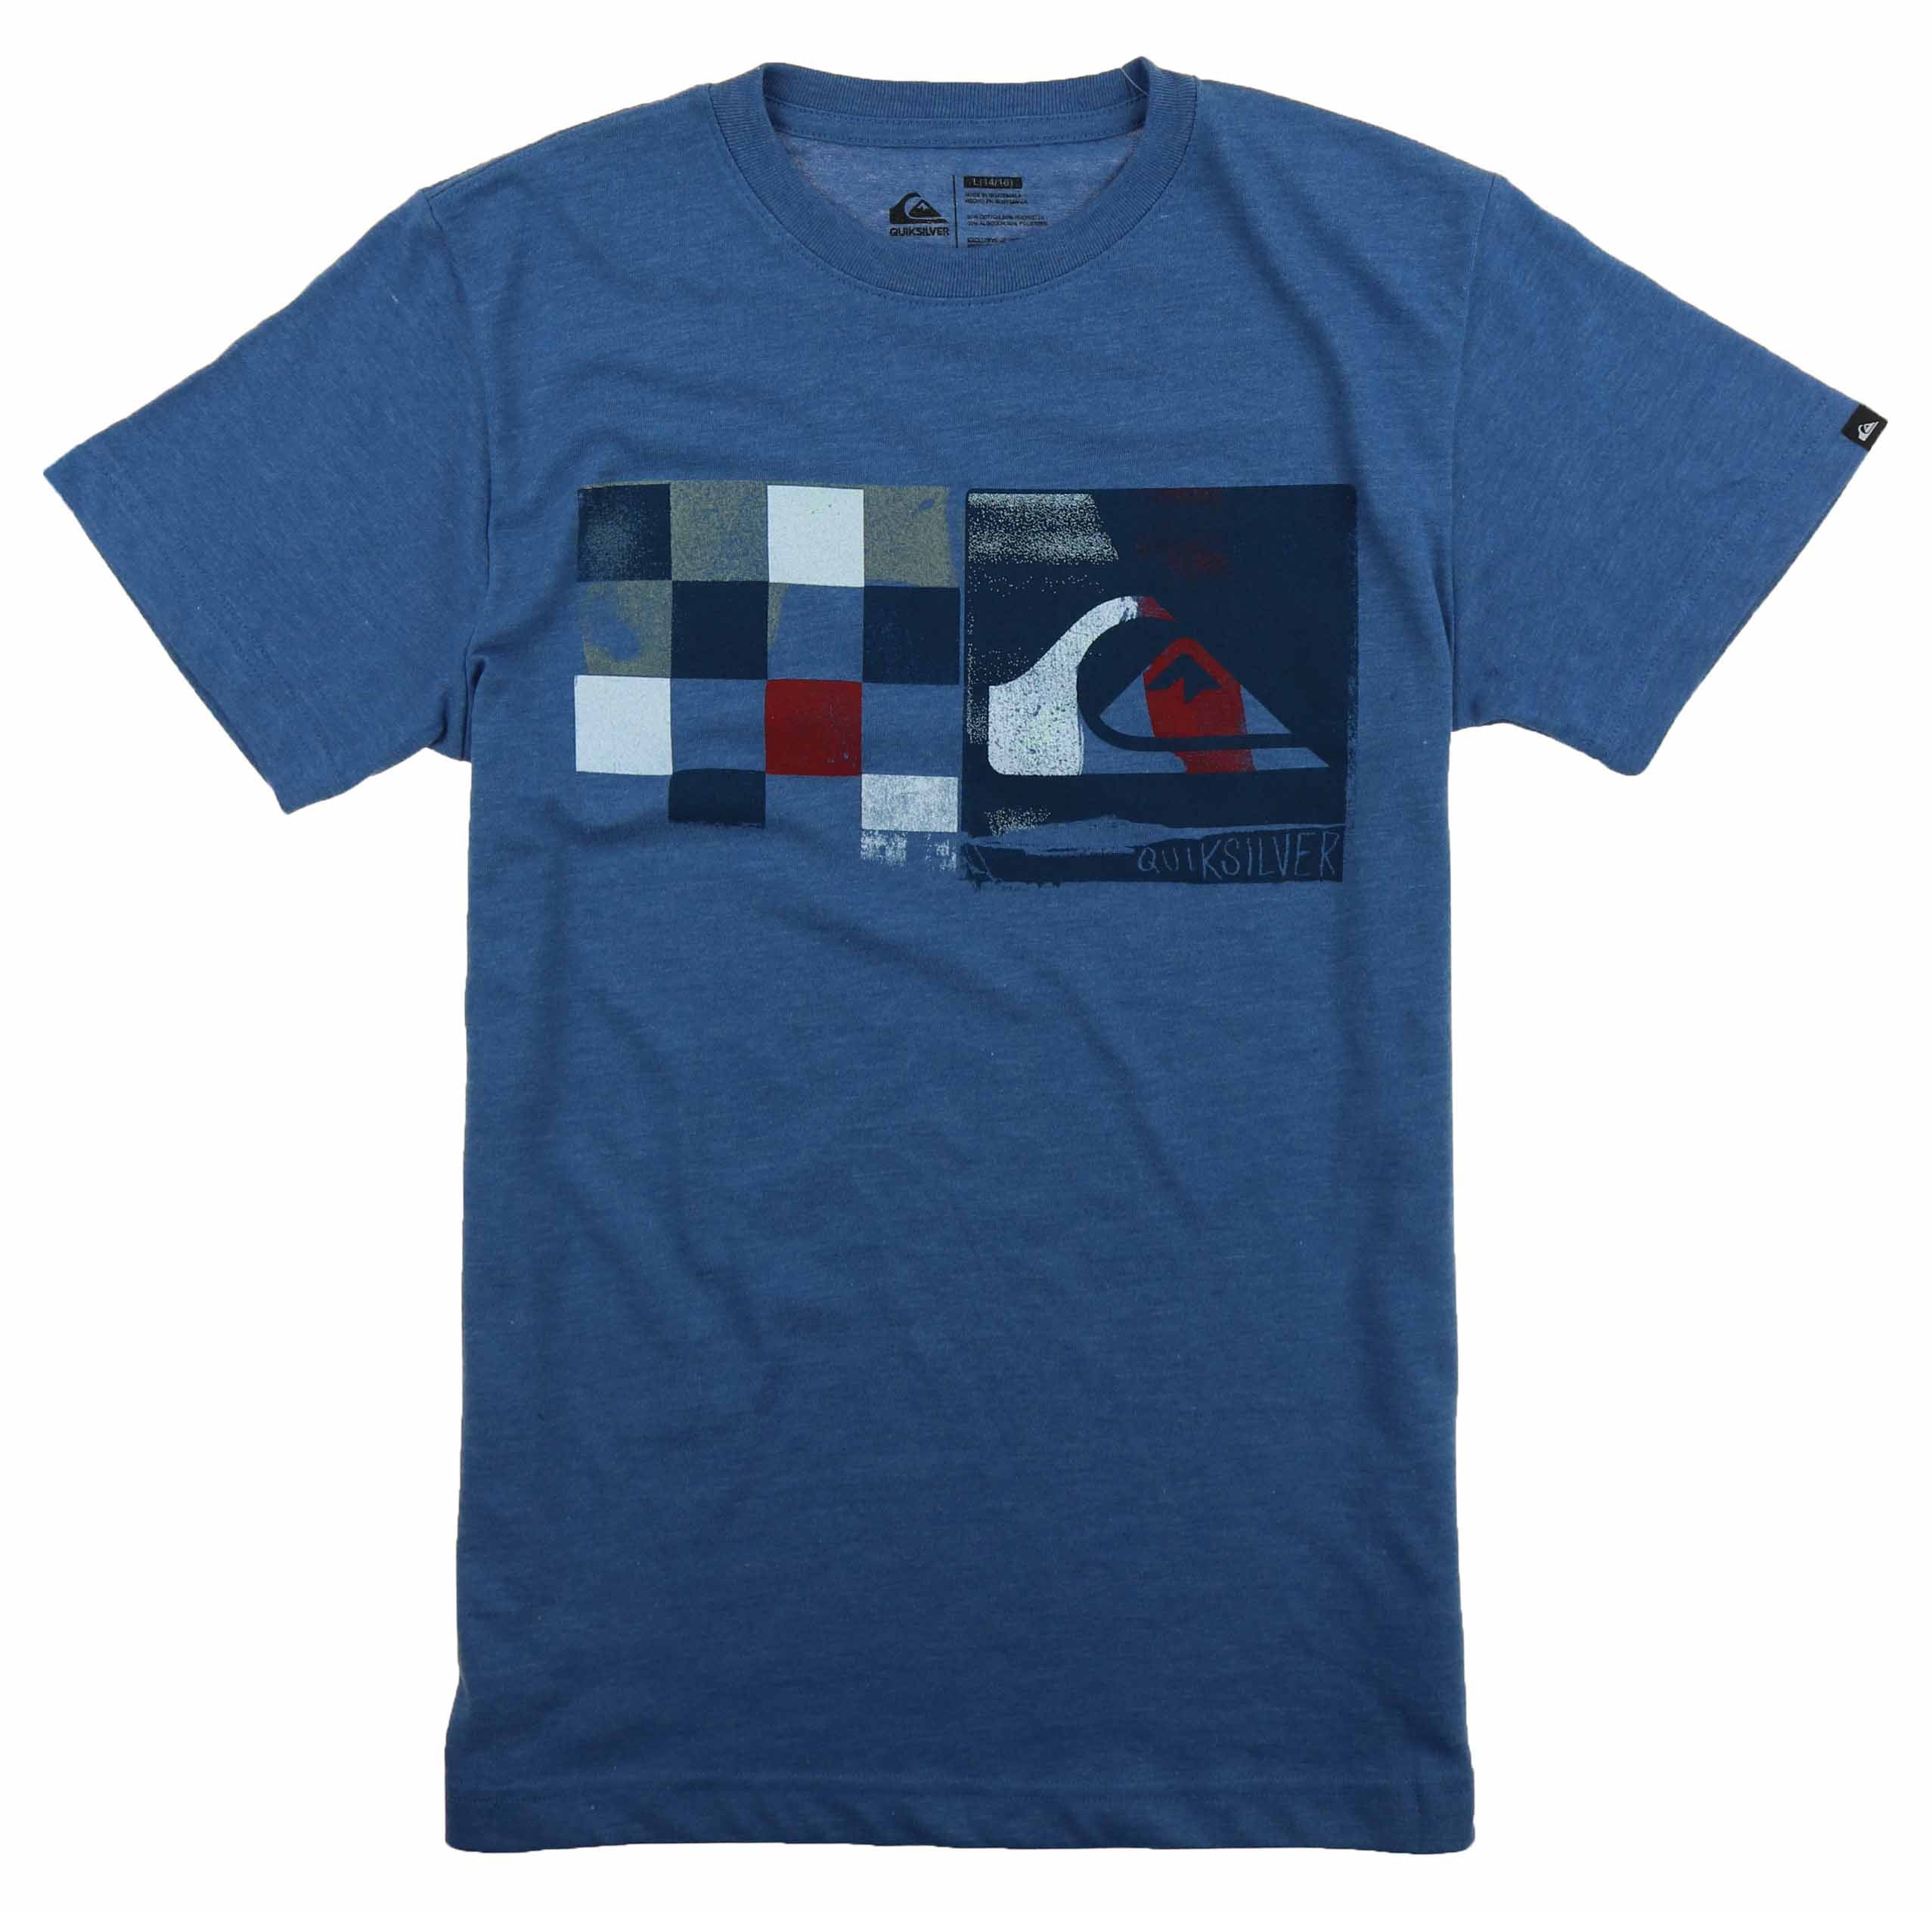 Quiksilver Kids Childrens T-Shirt E Broadcast Blue Age 12 14 16 Perfect Gift 